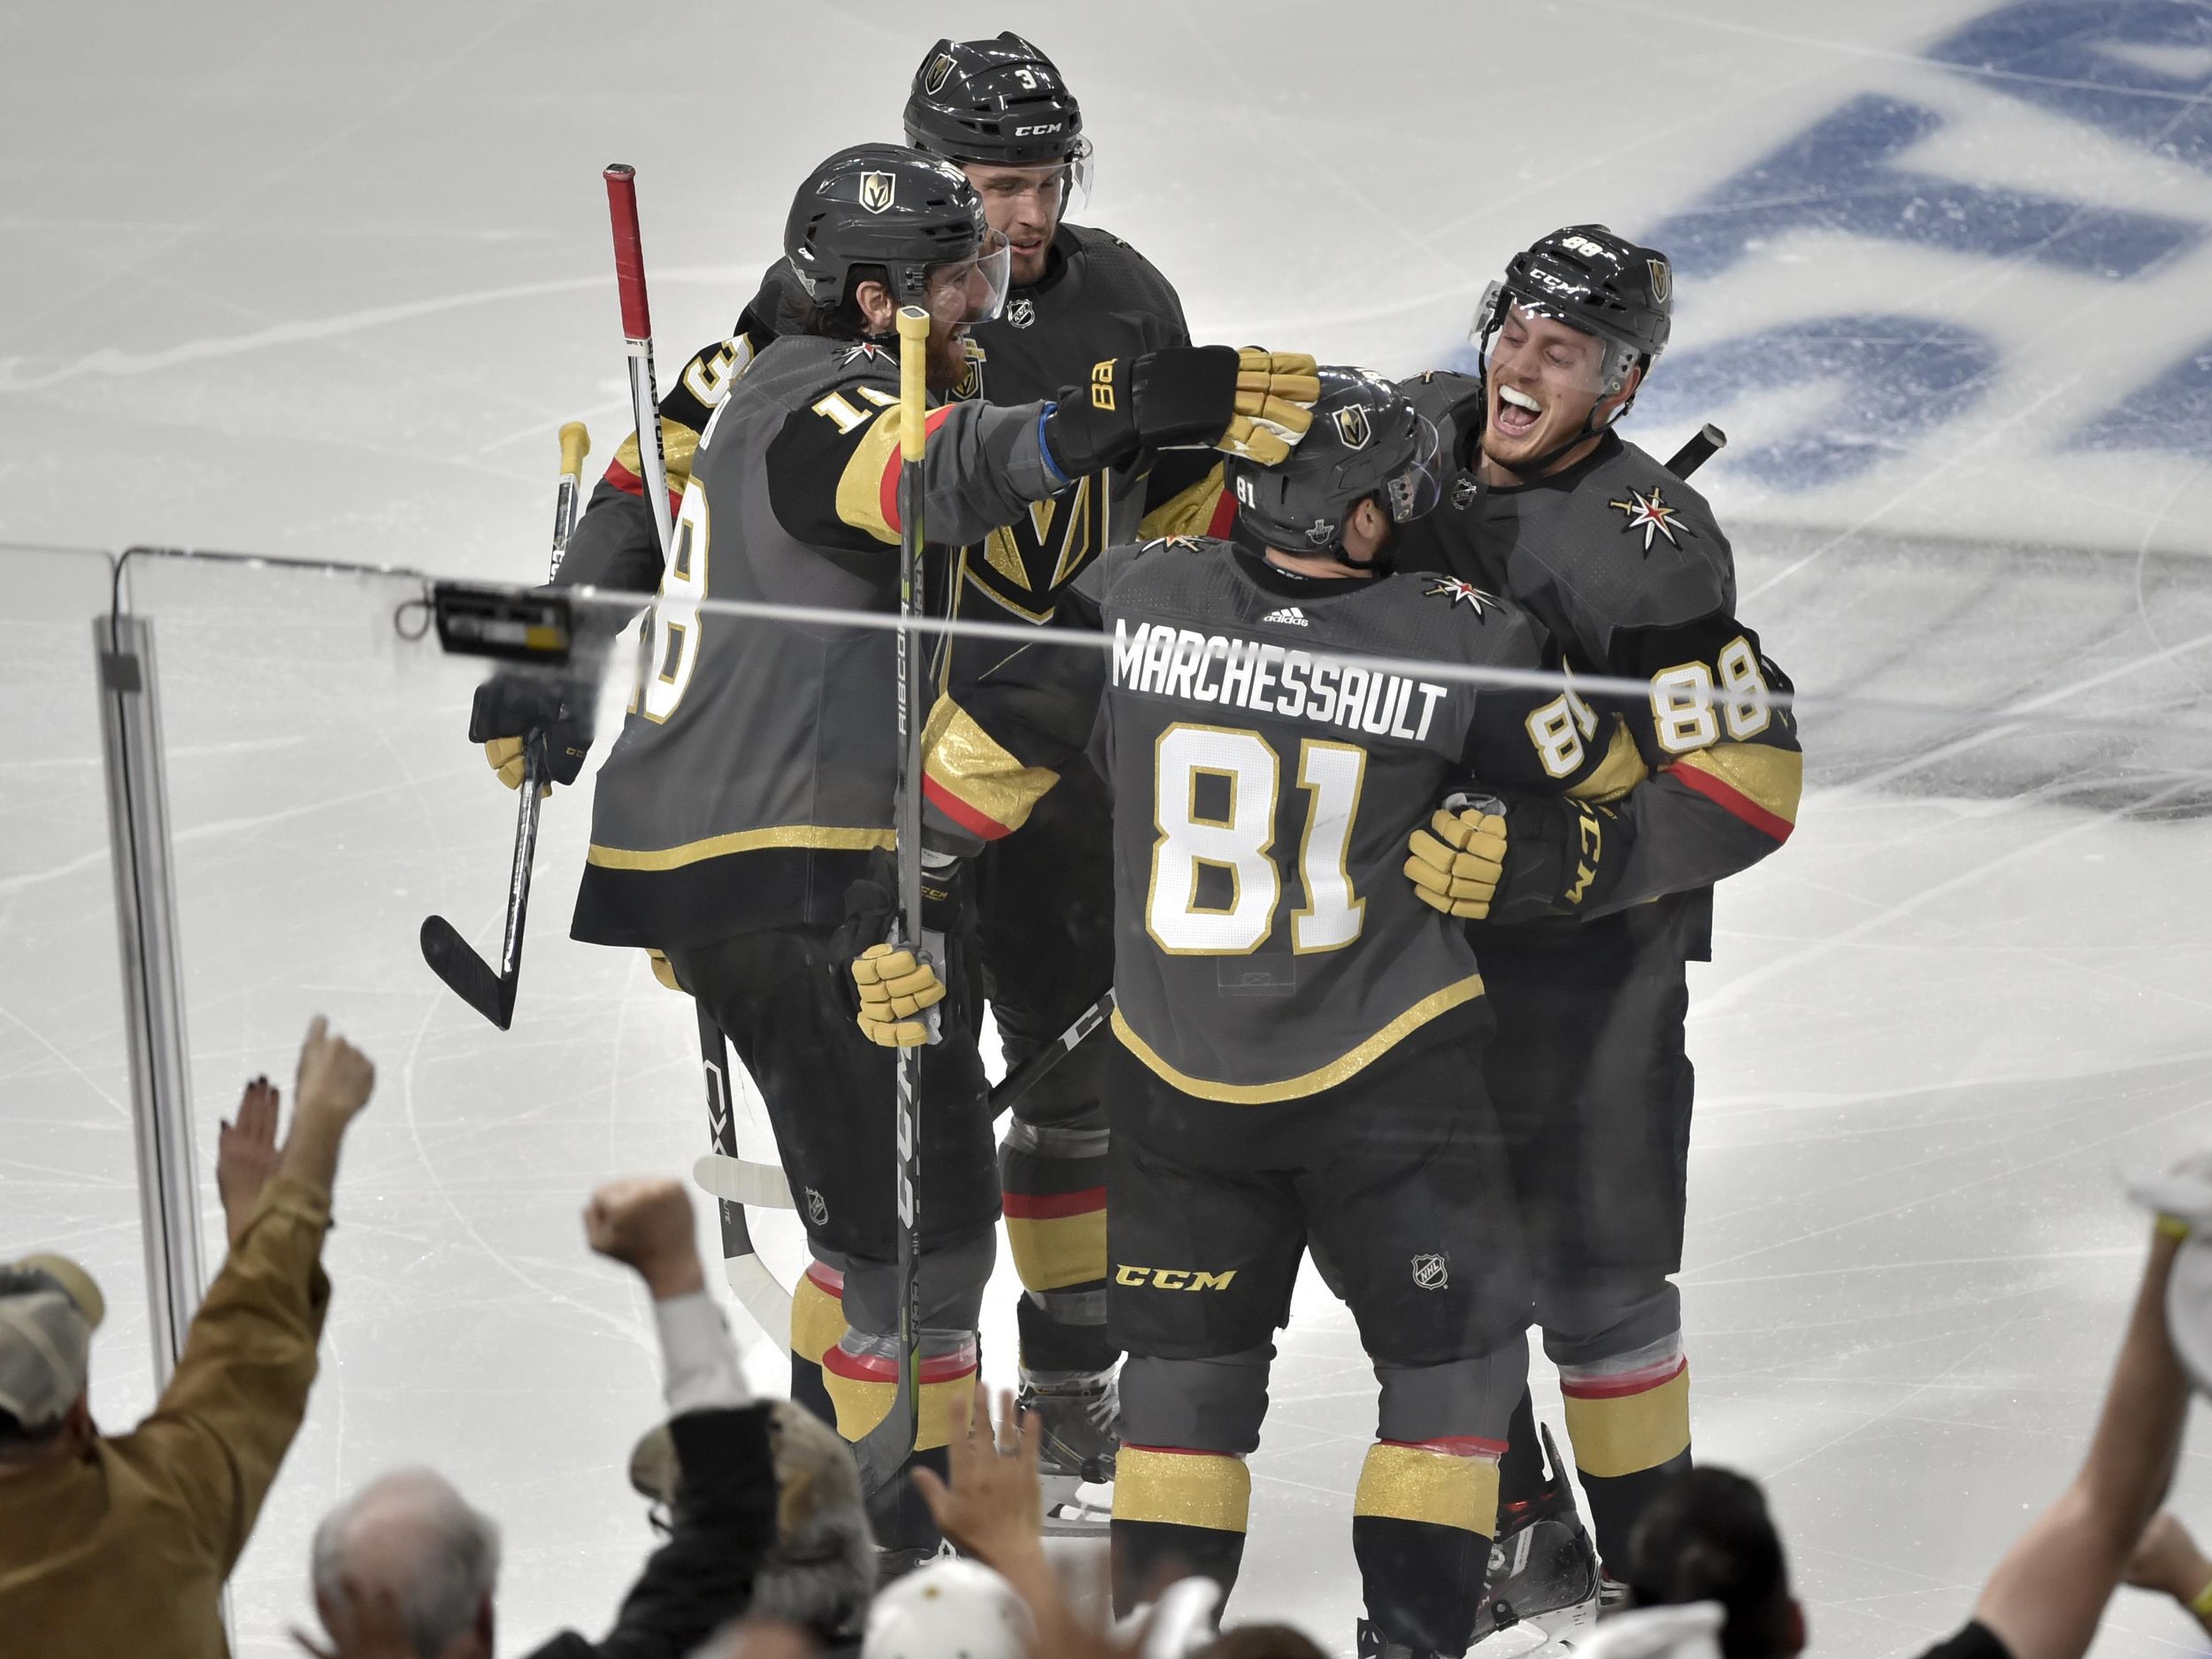 Marchessault scores twice, lifts Golden Knights over Jets